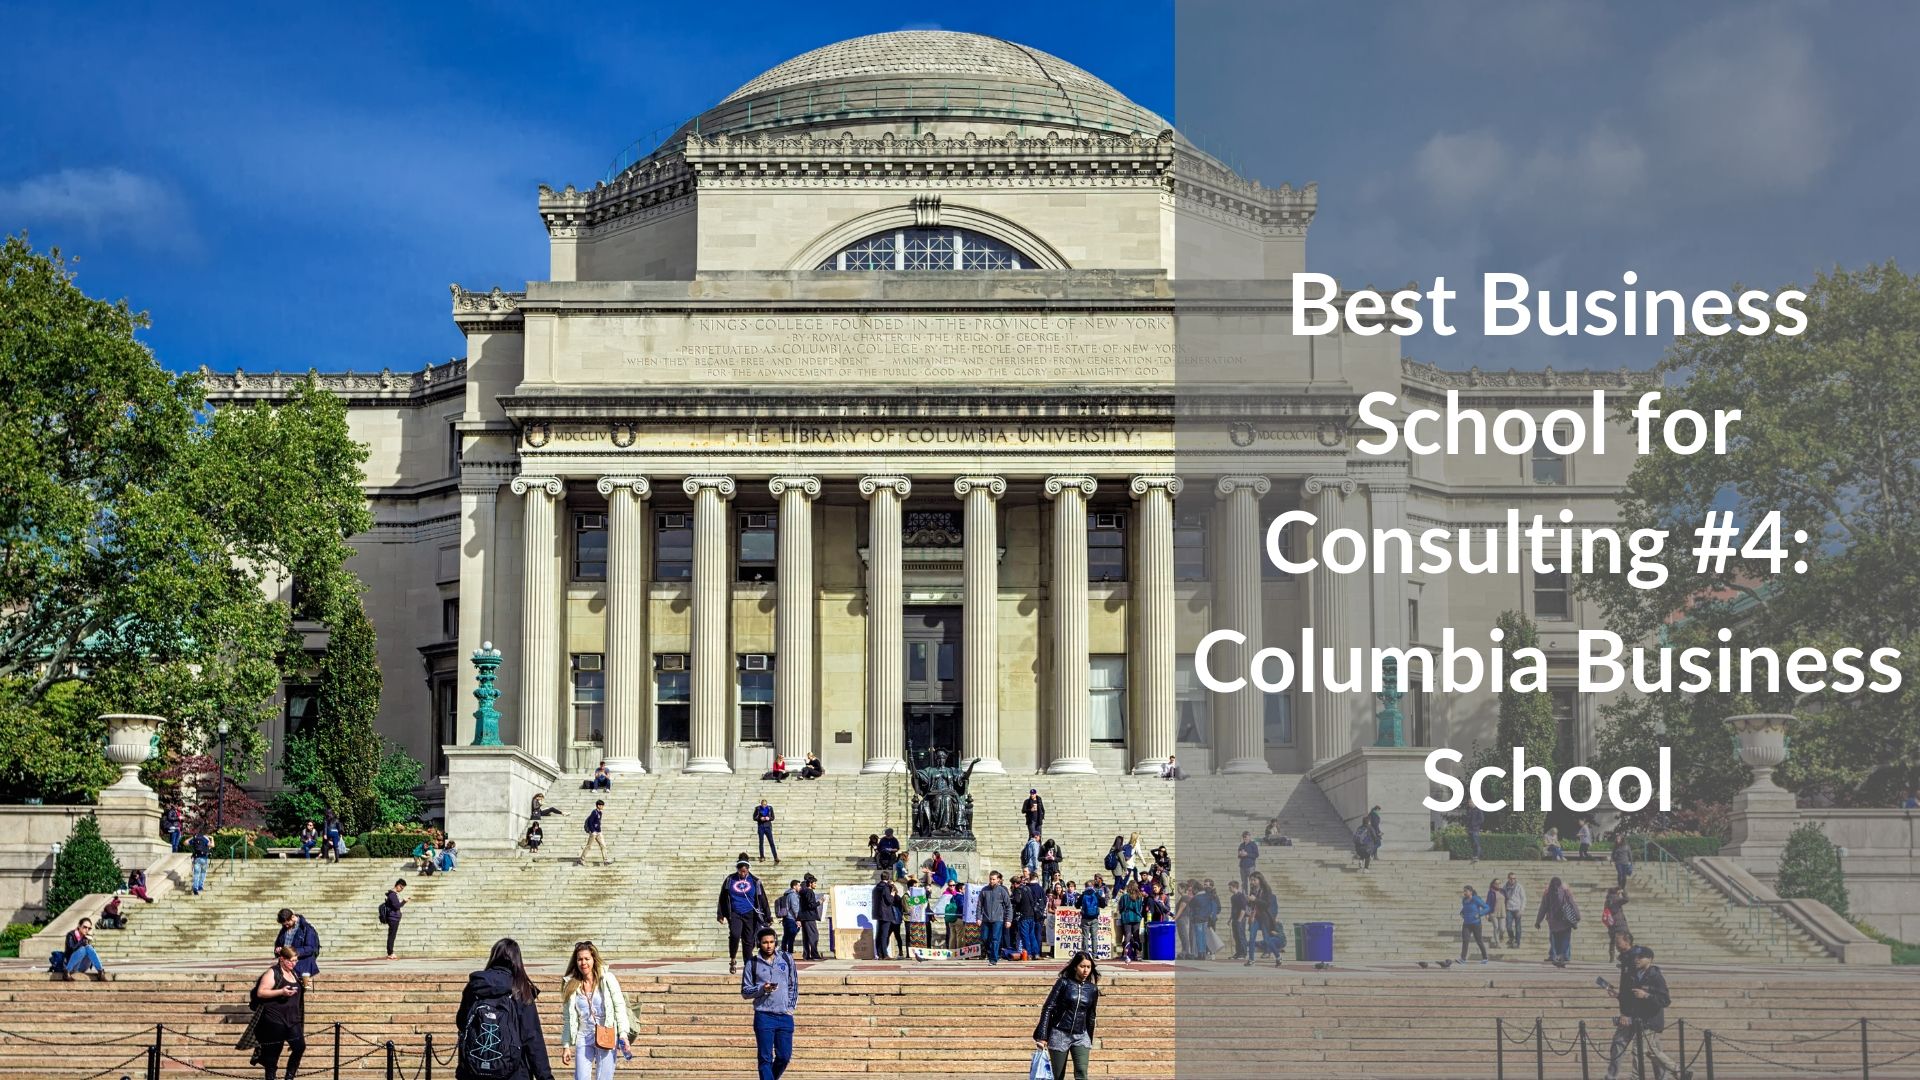 Best Business School for Consulting #4 - Yale School of Management